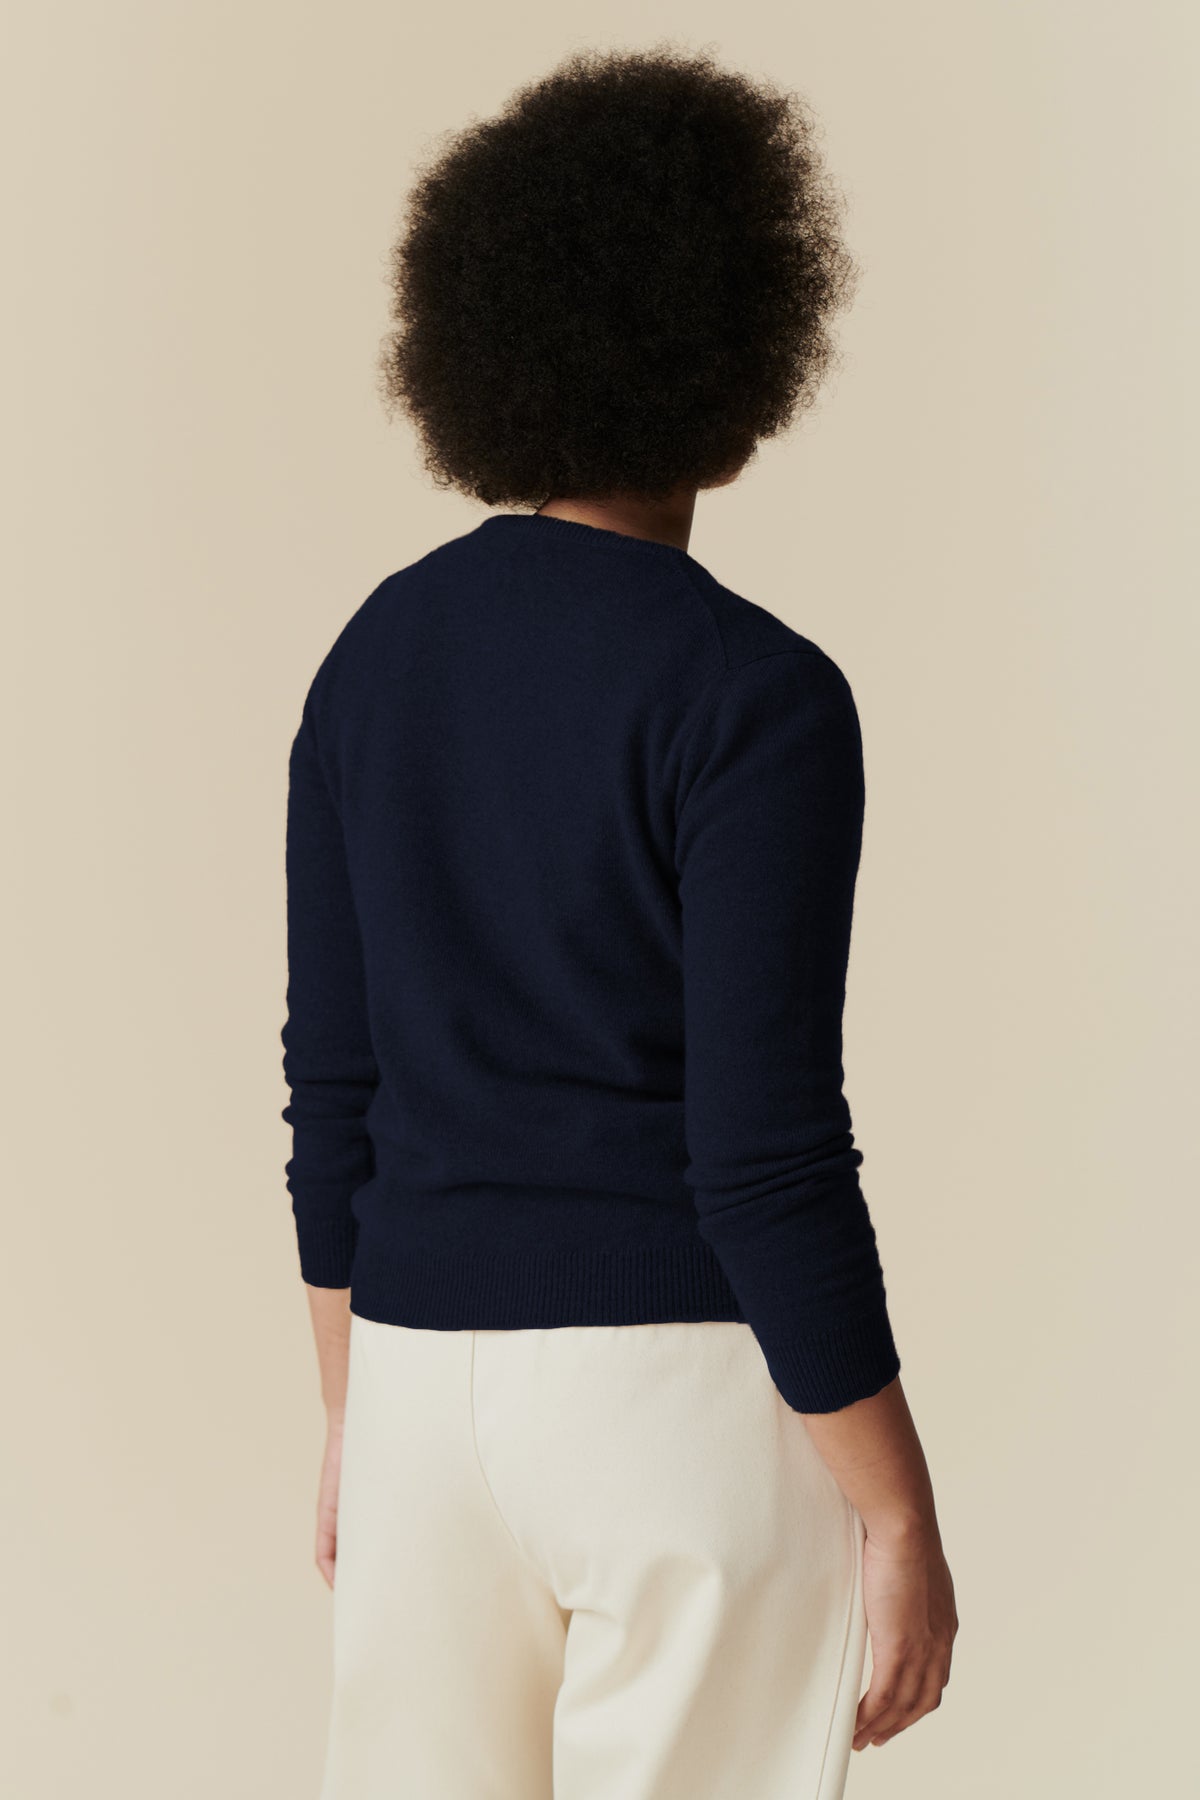 
            Image of back of female wearing lambswool crew neck in navy